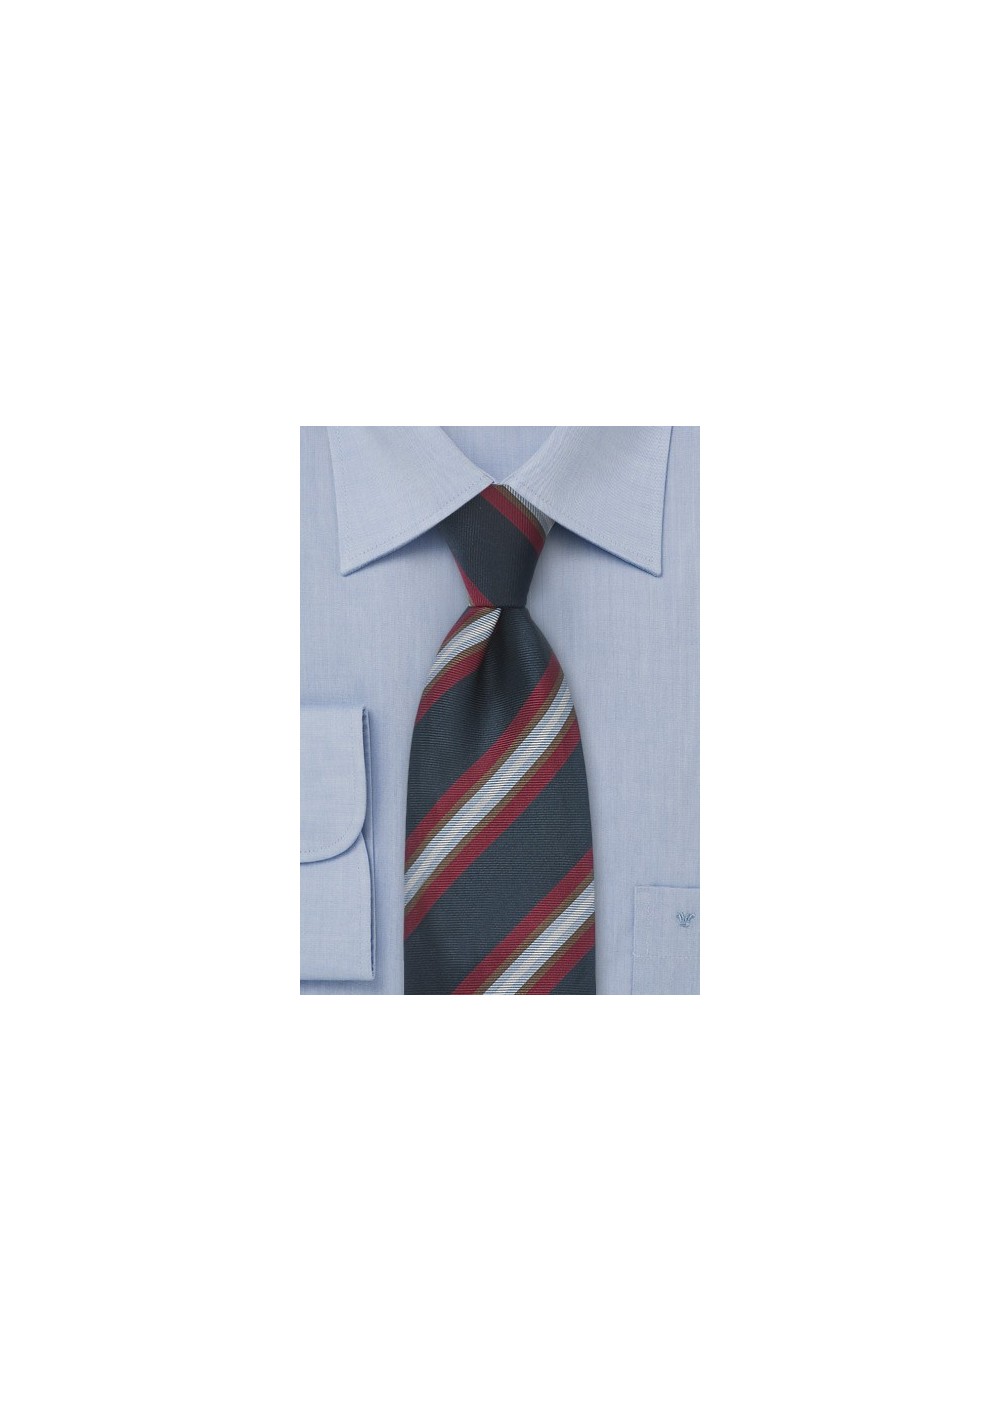 Wide Striped Tie in Navy and Red